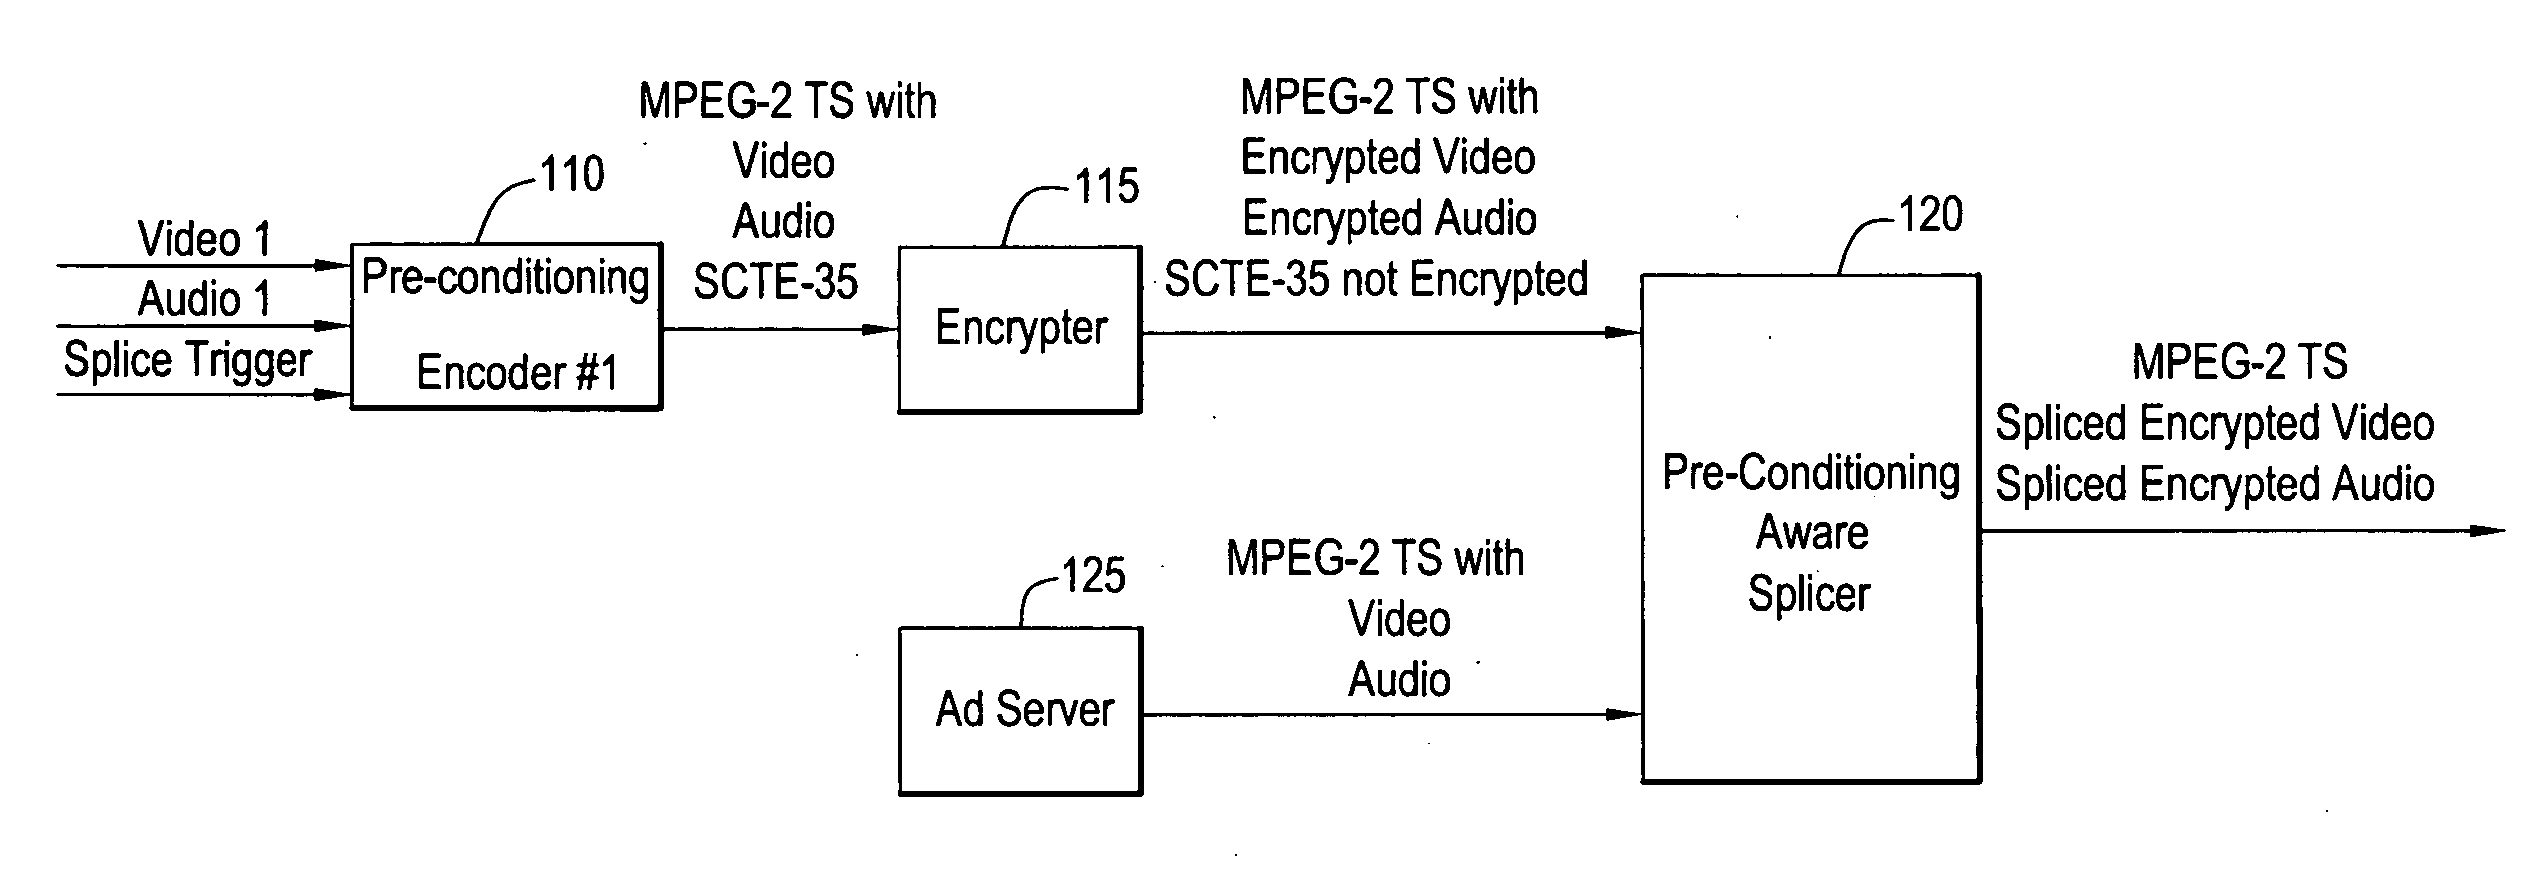 Splicing of Encrypted Video/Audio Content